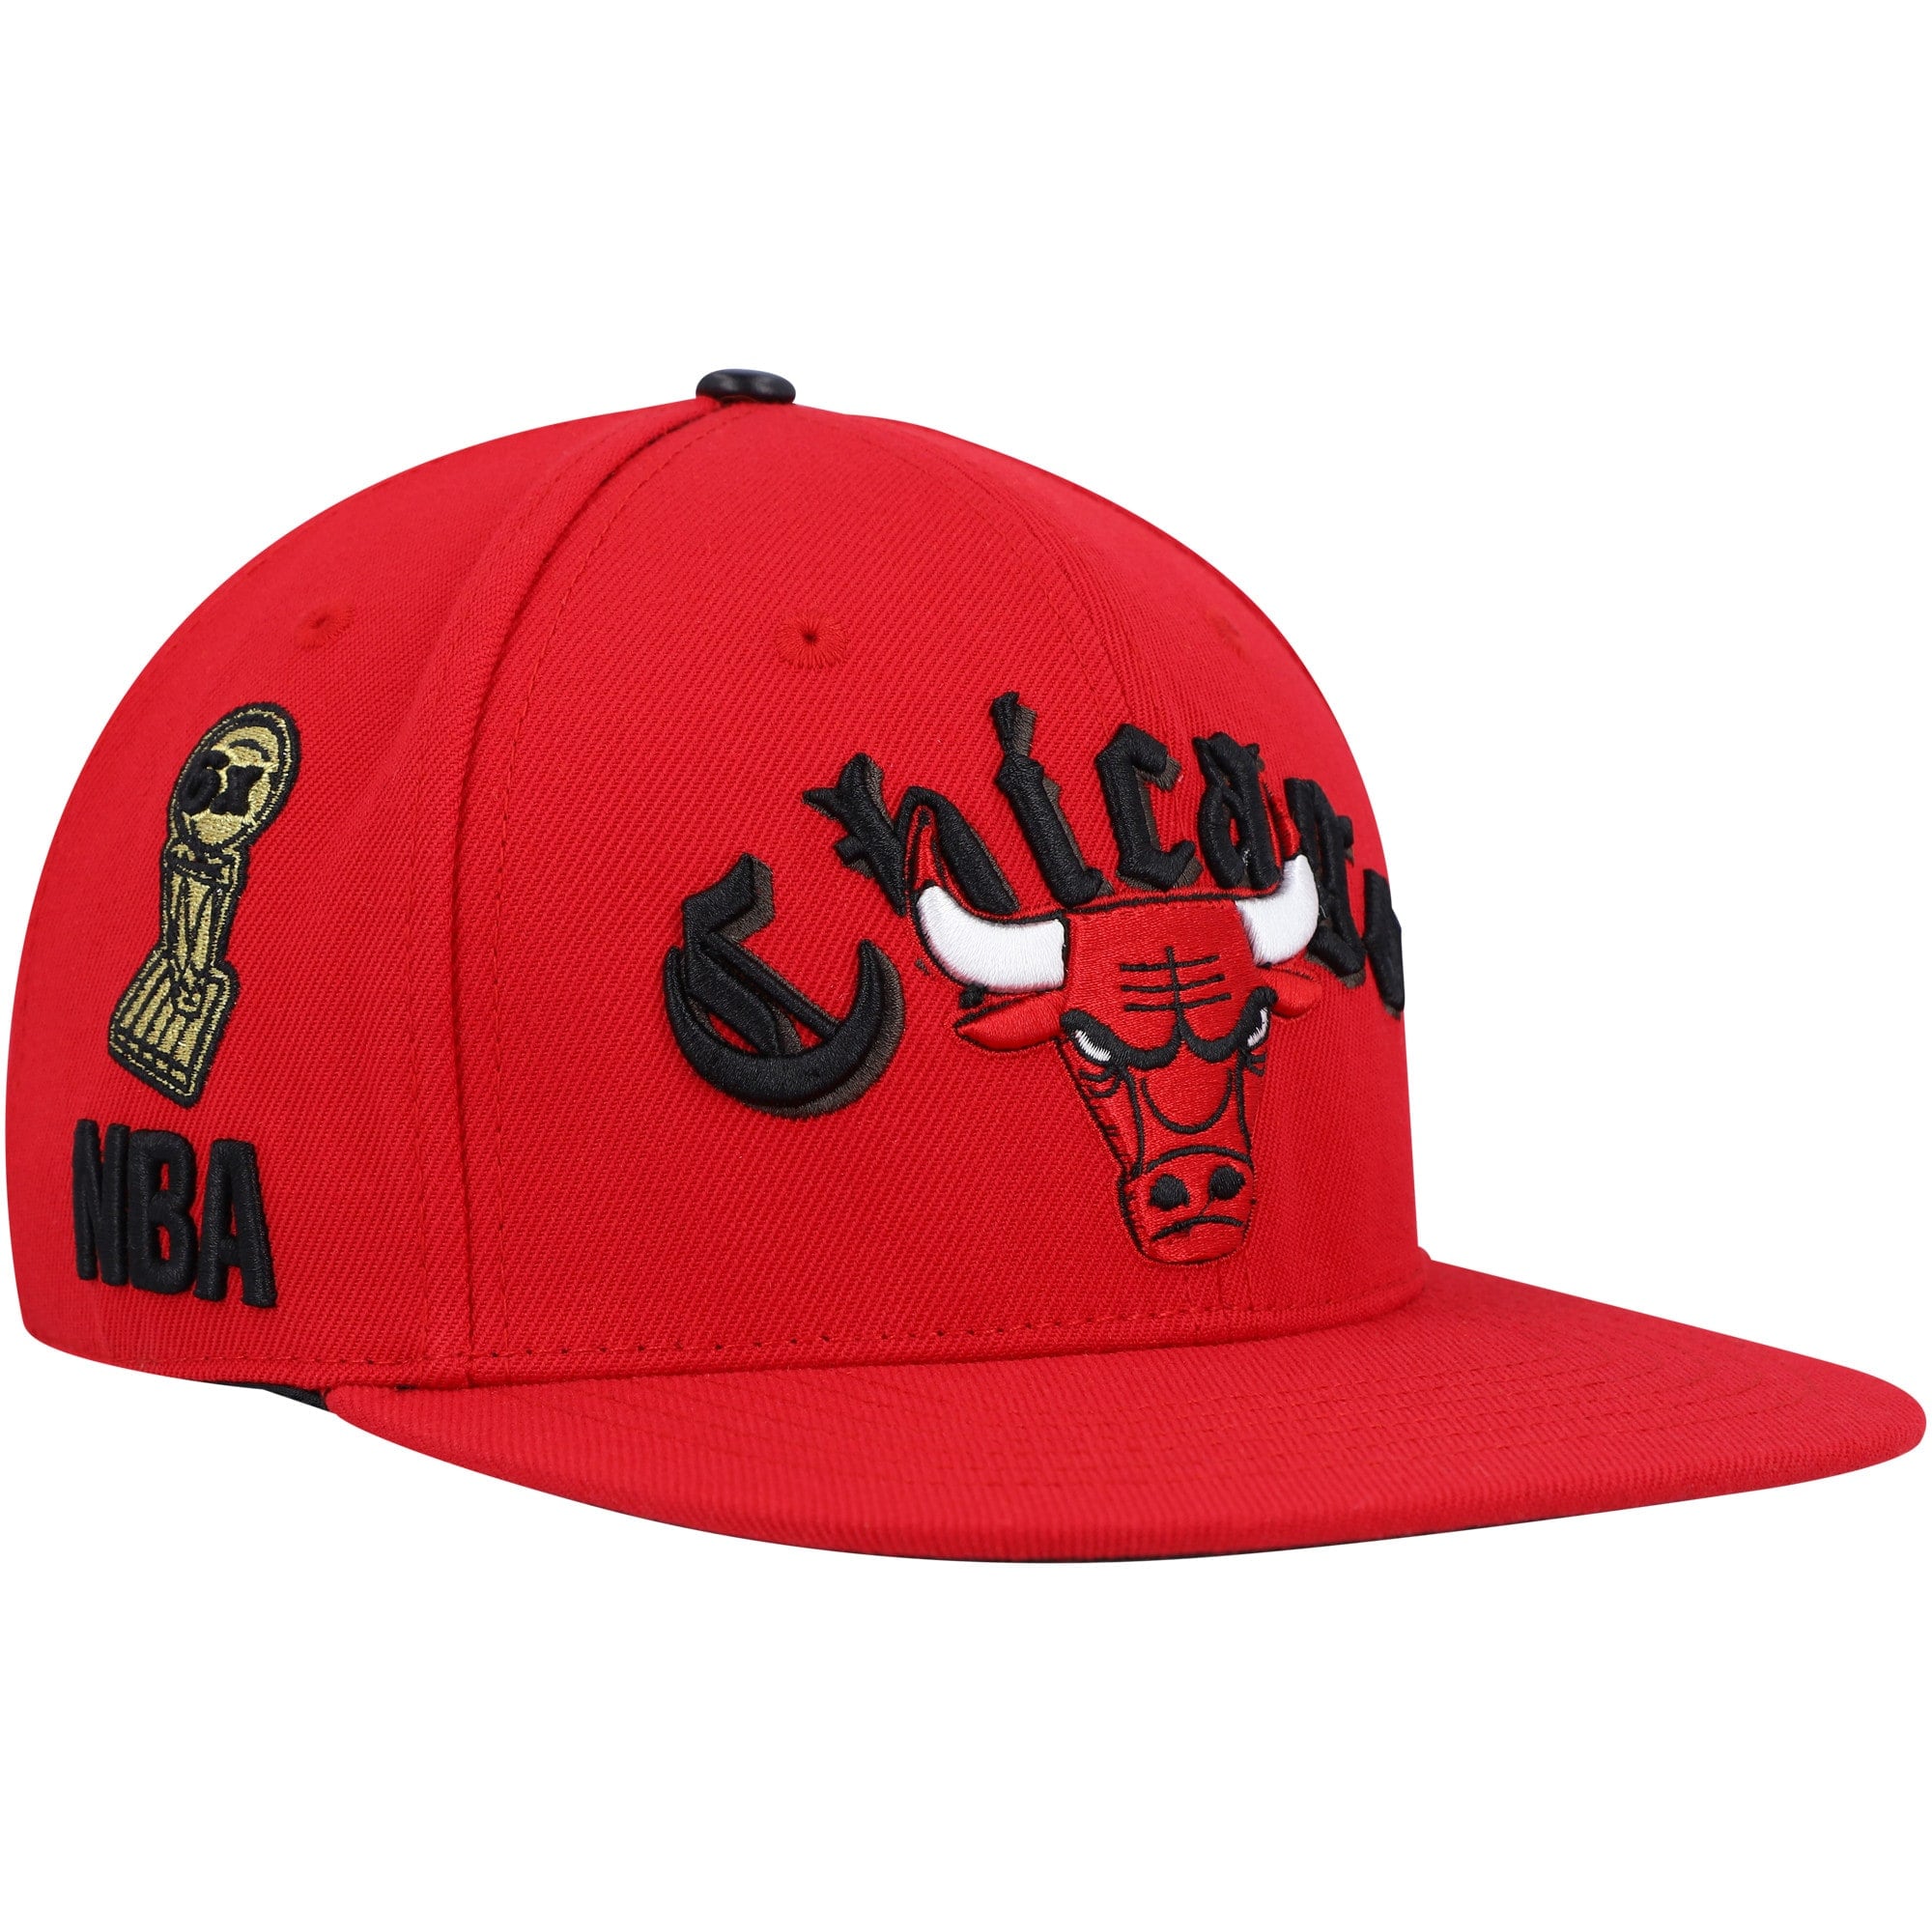 Chicago Bulls Pro Standard Old English Snapback Hat - Red – Sneaker stores